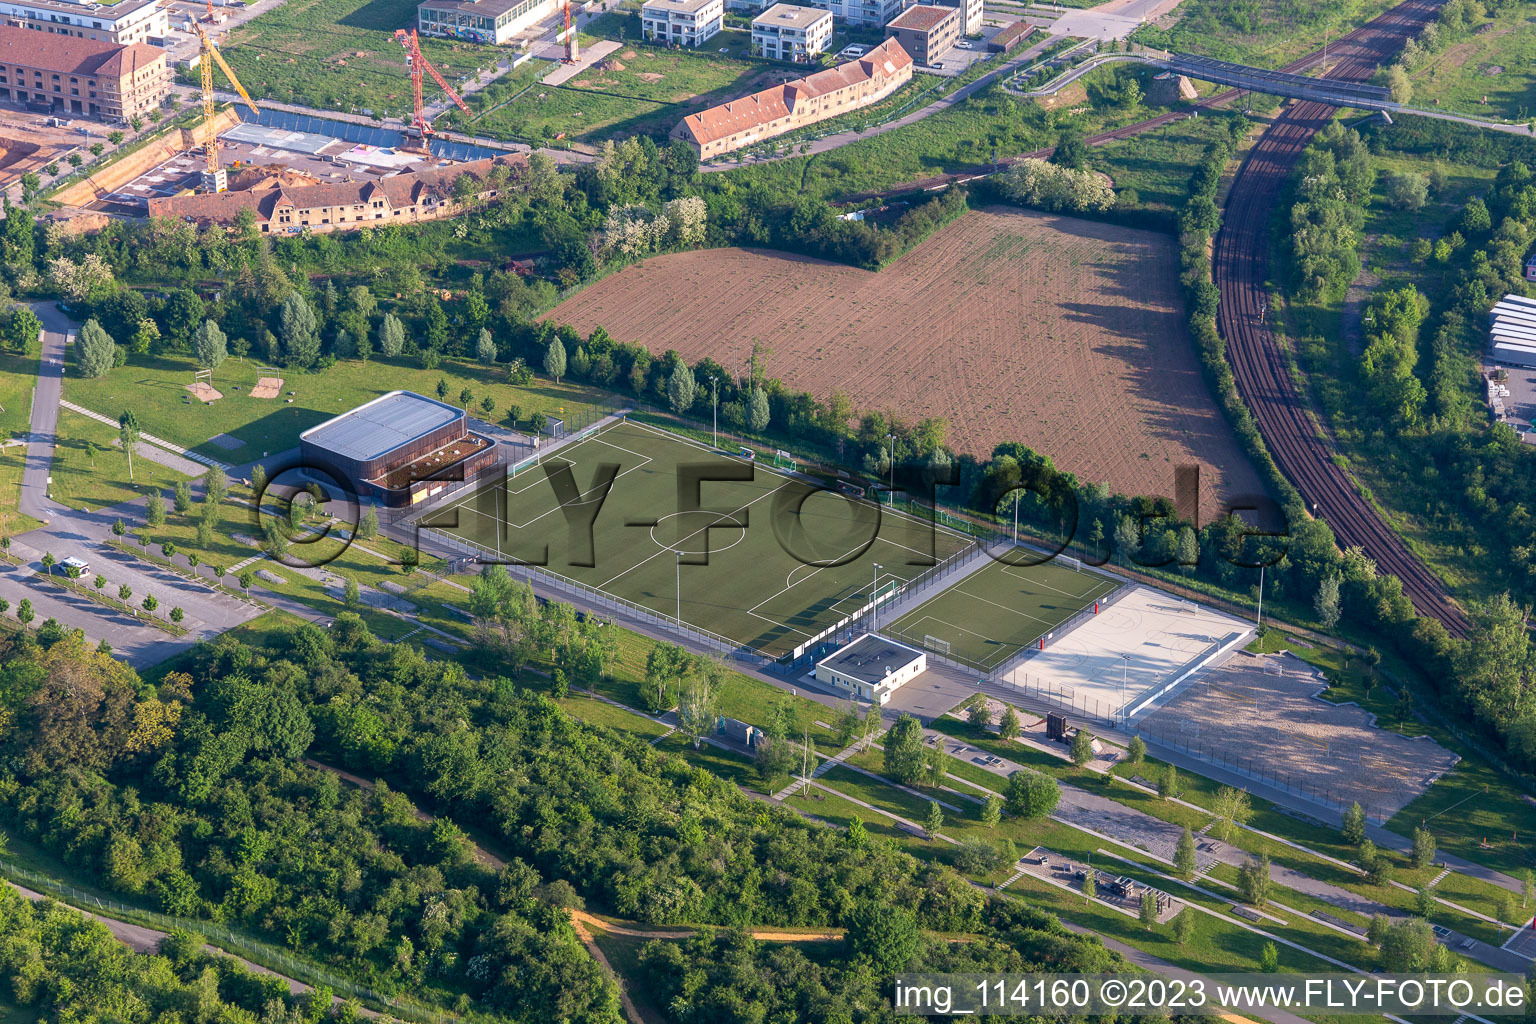 Sports grounds and football pitch of TSV Landau 1985 e.V. in Landau in der Pfalz in the state Rhineland-Palatinate, Germany